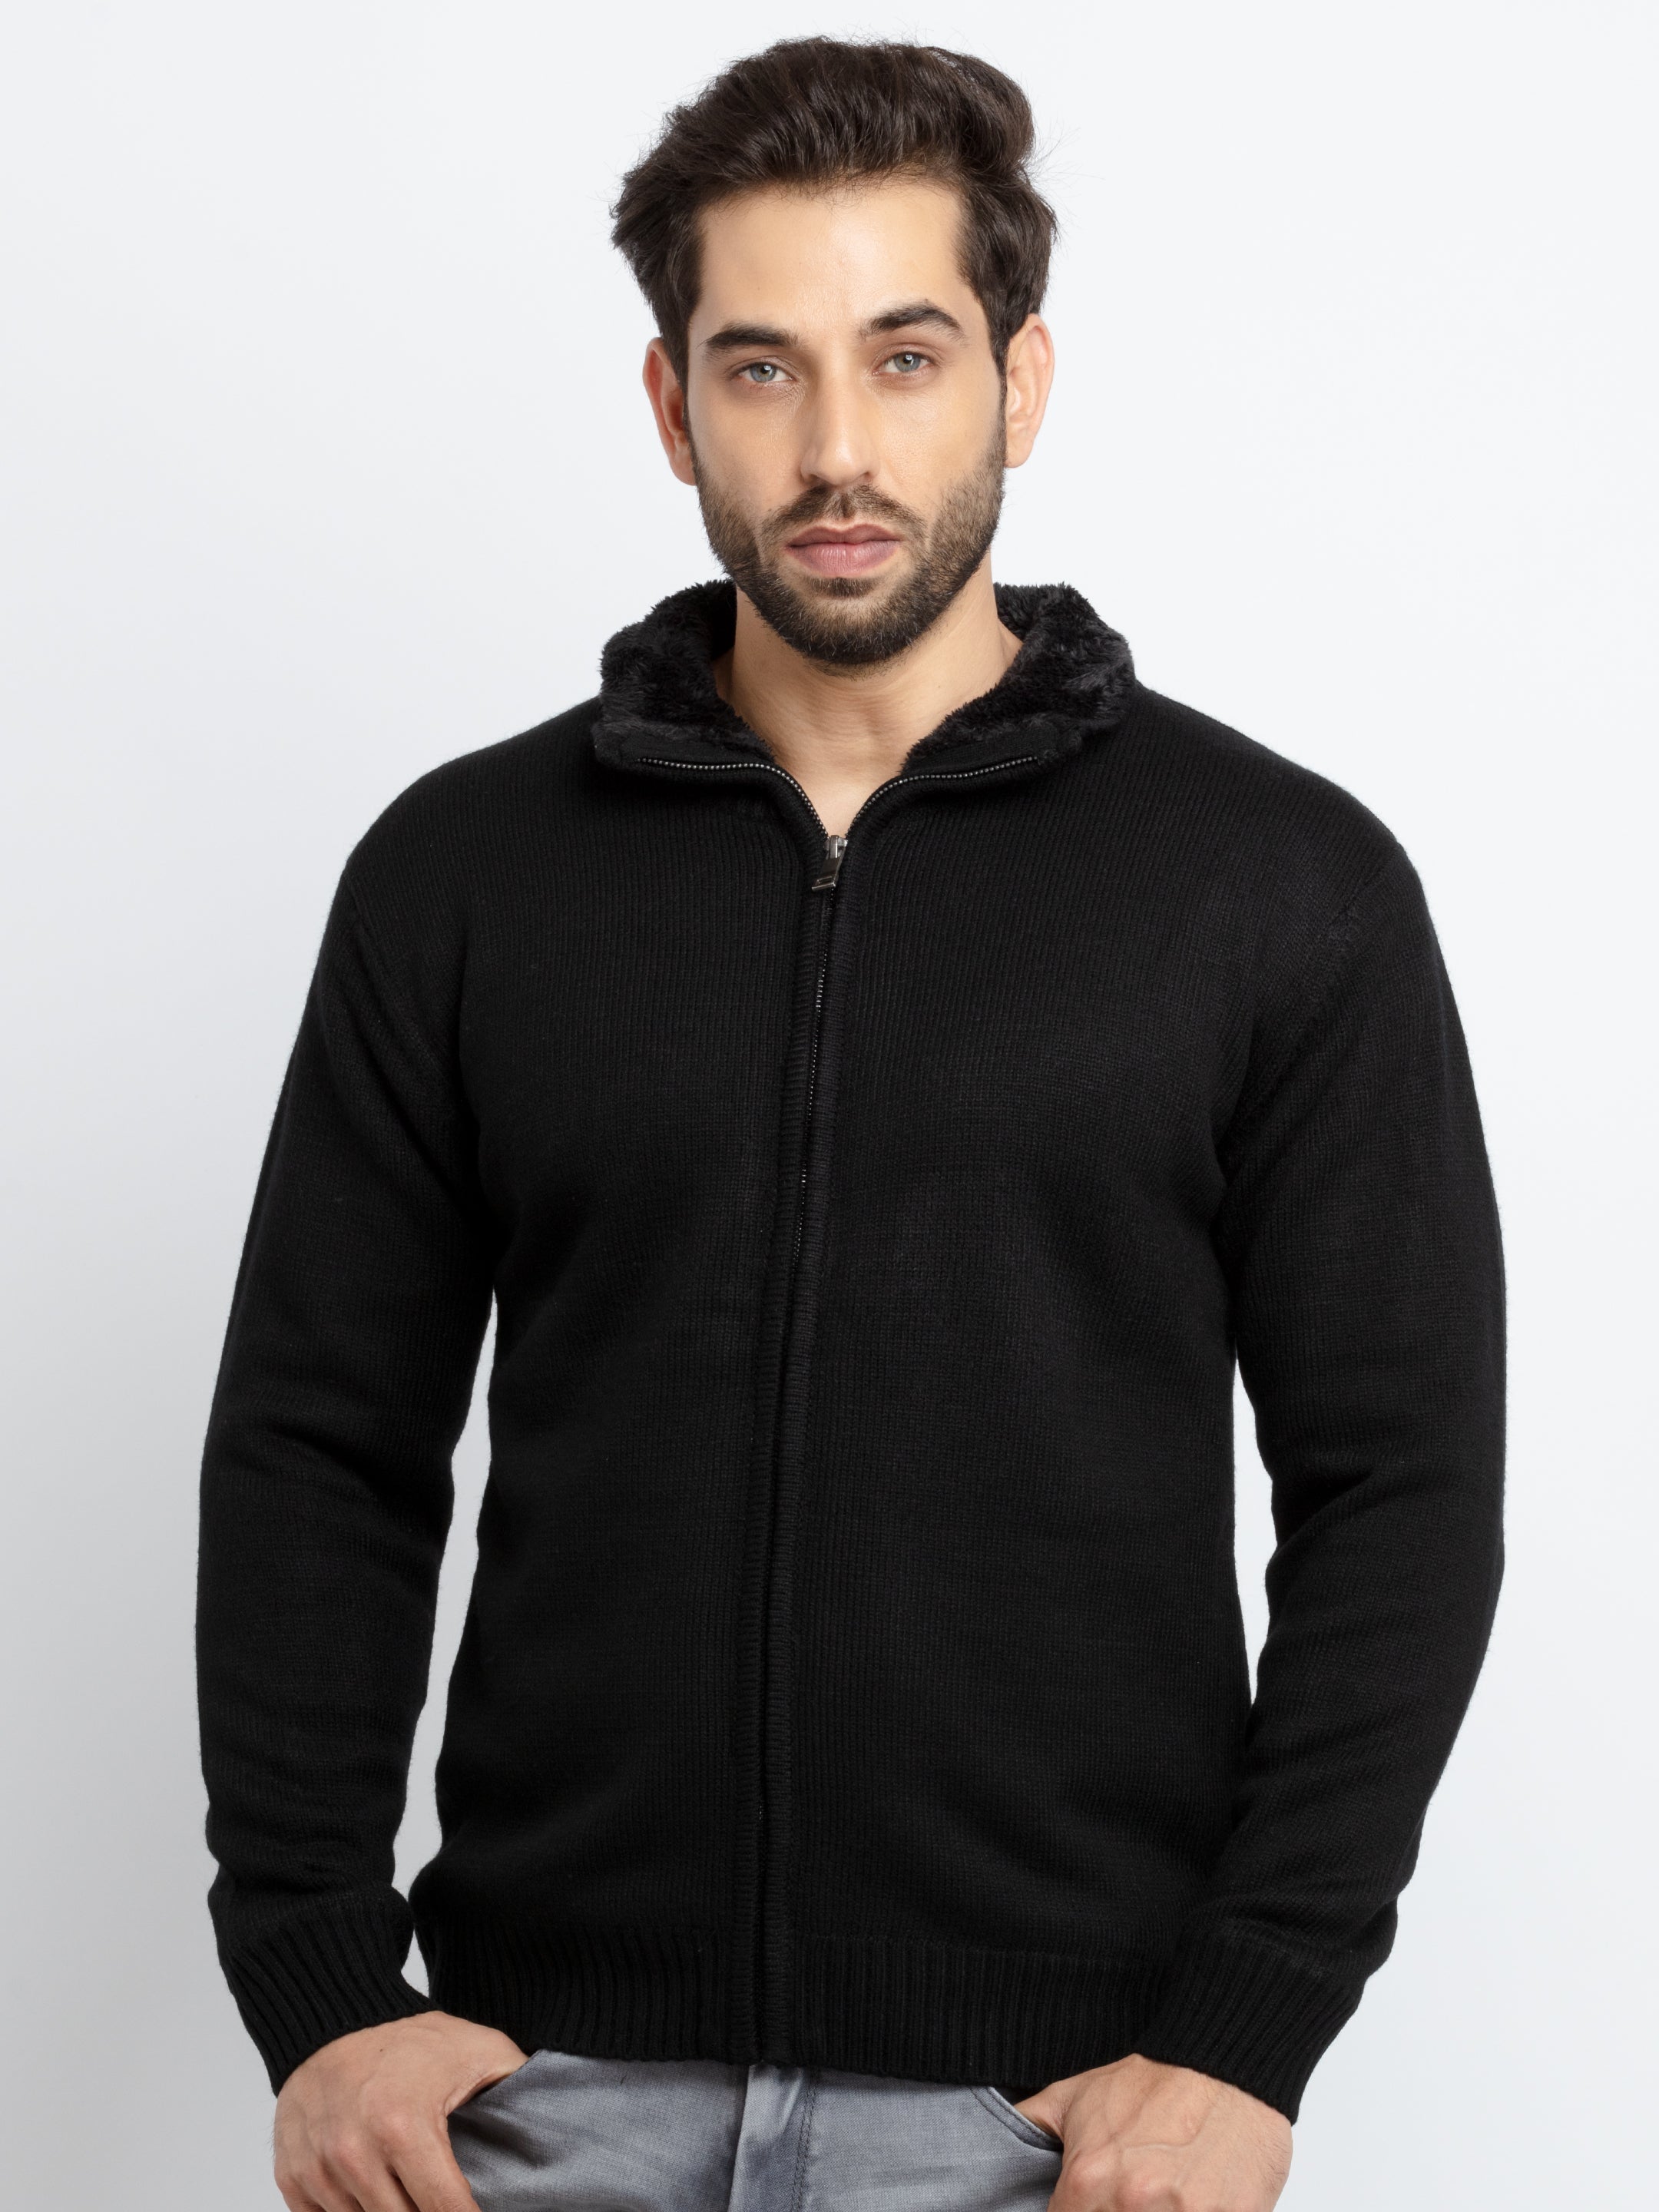 hooded sweaters for men